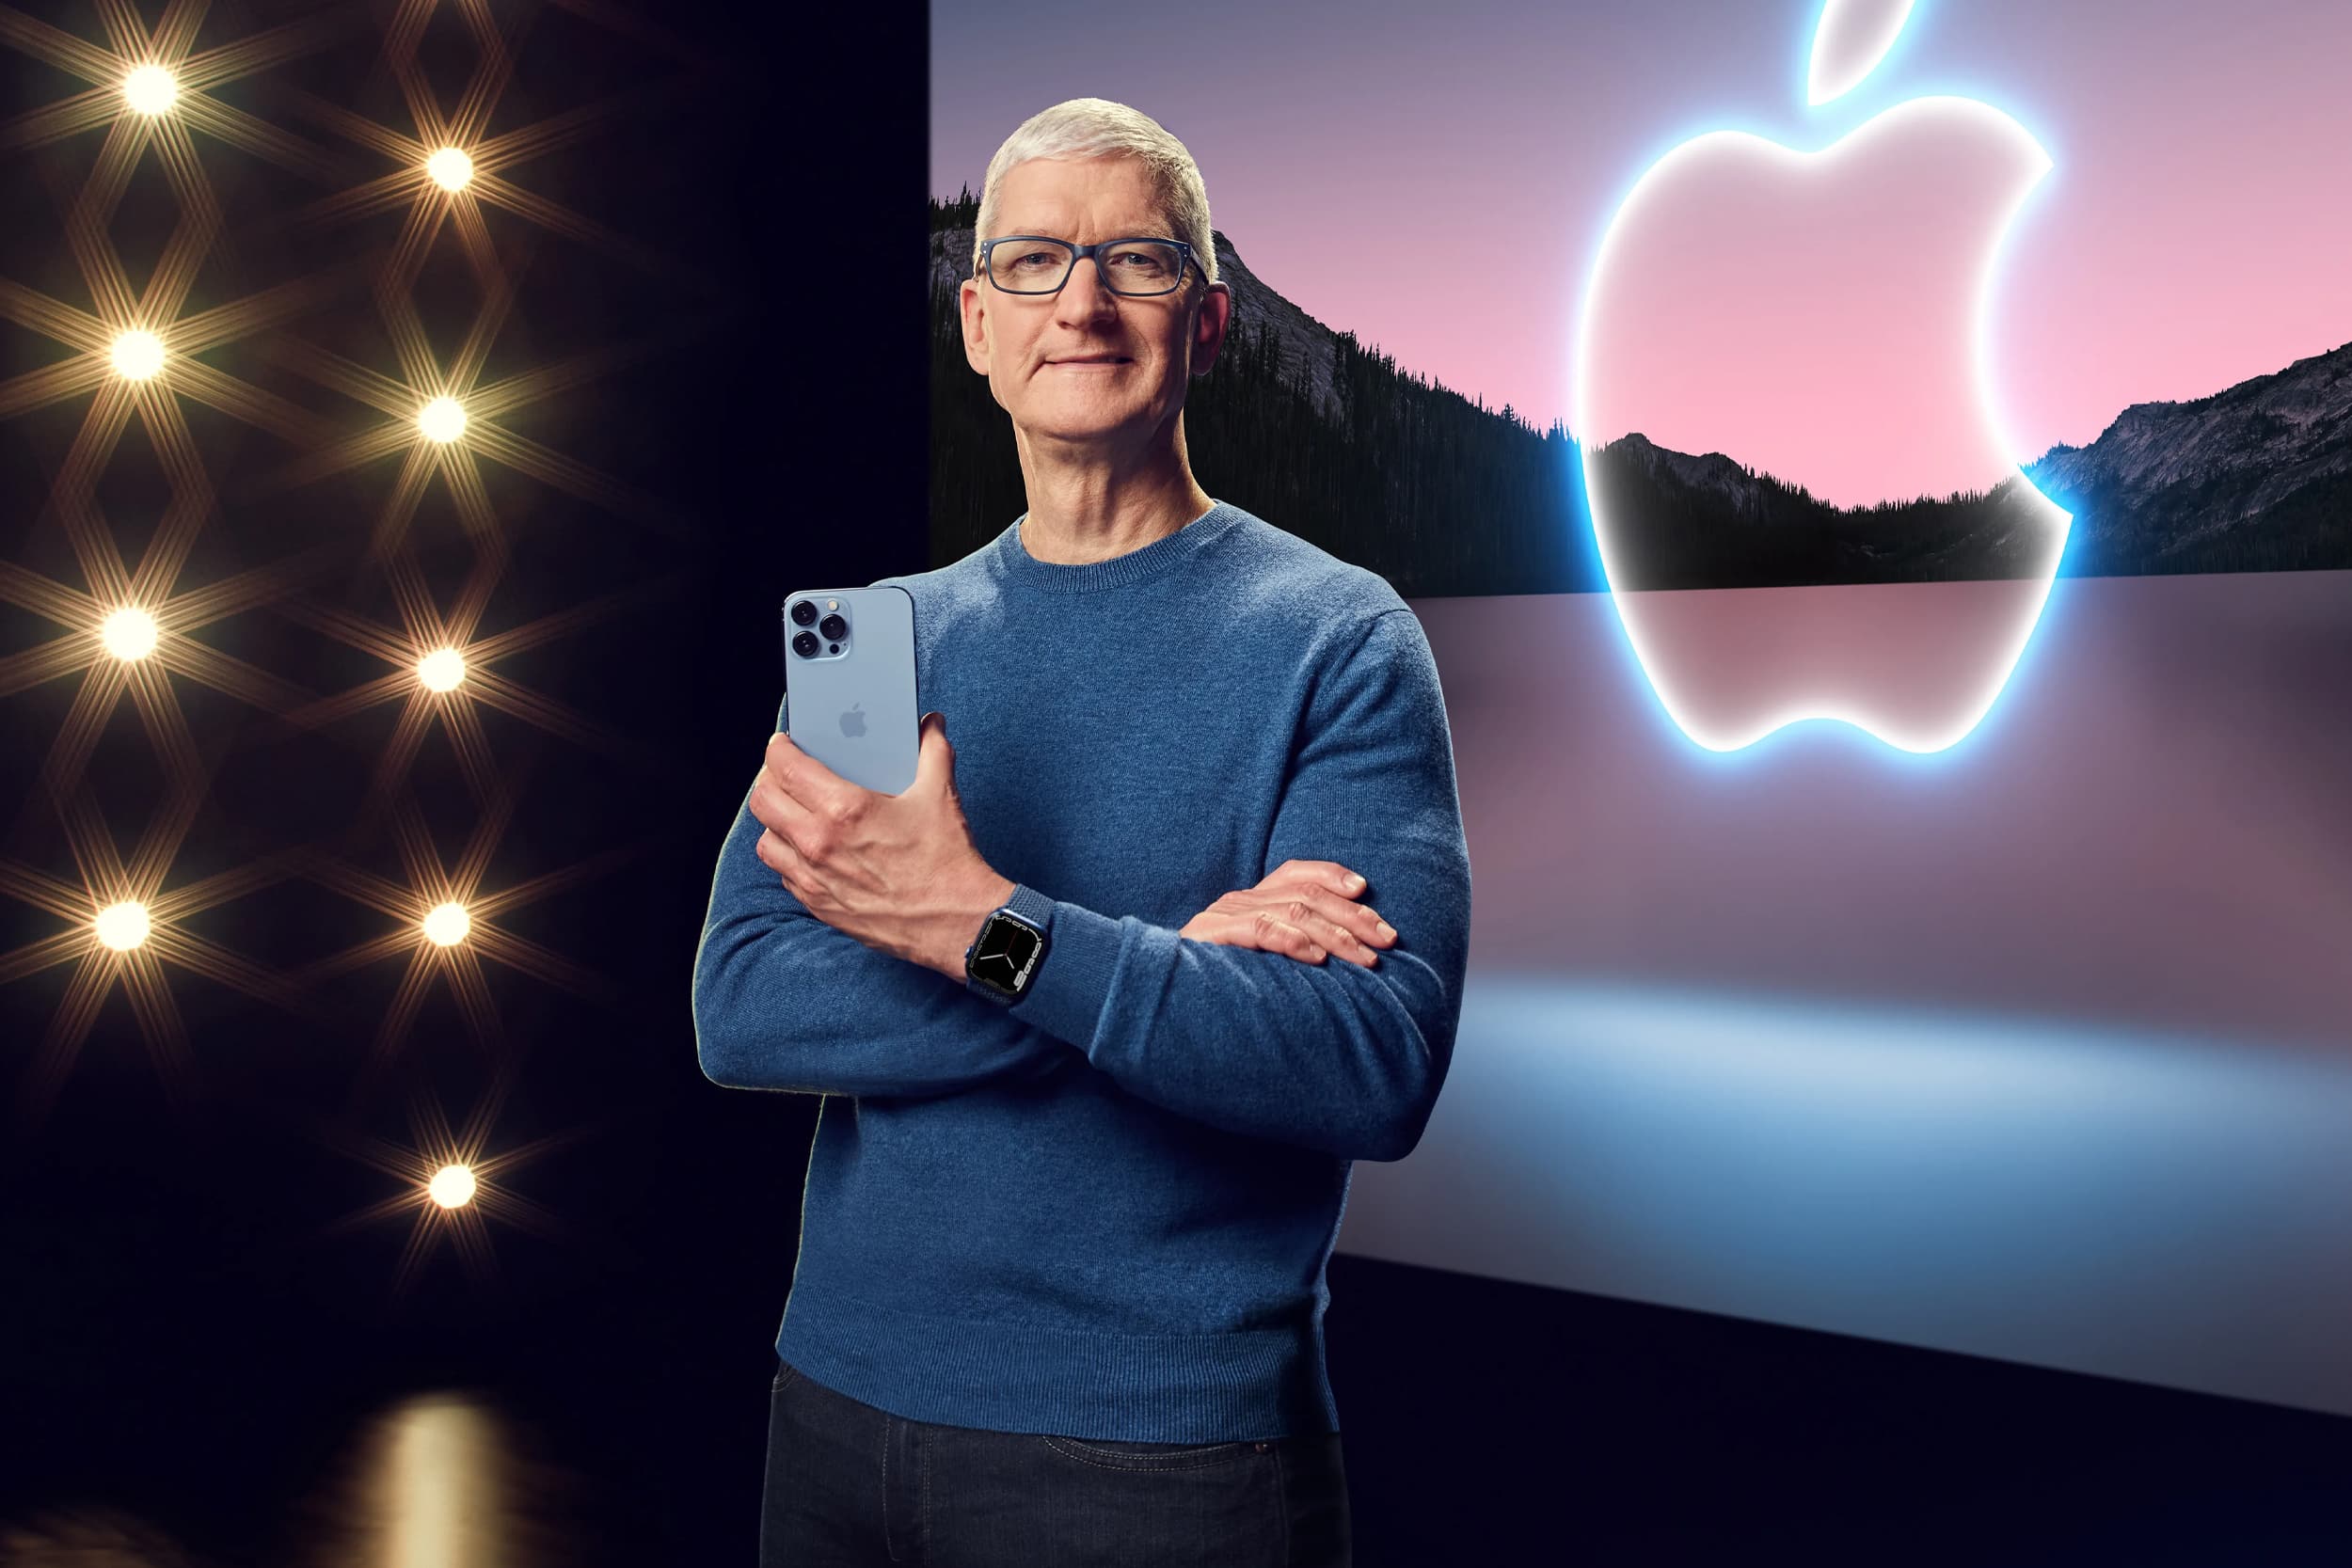 tim cook apple ceo holding iphone 13 pro max 65fc85e9bd4454ff2d898876